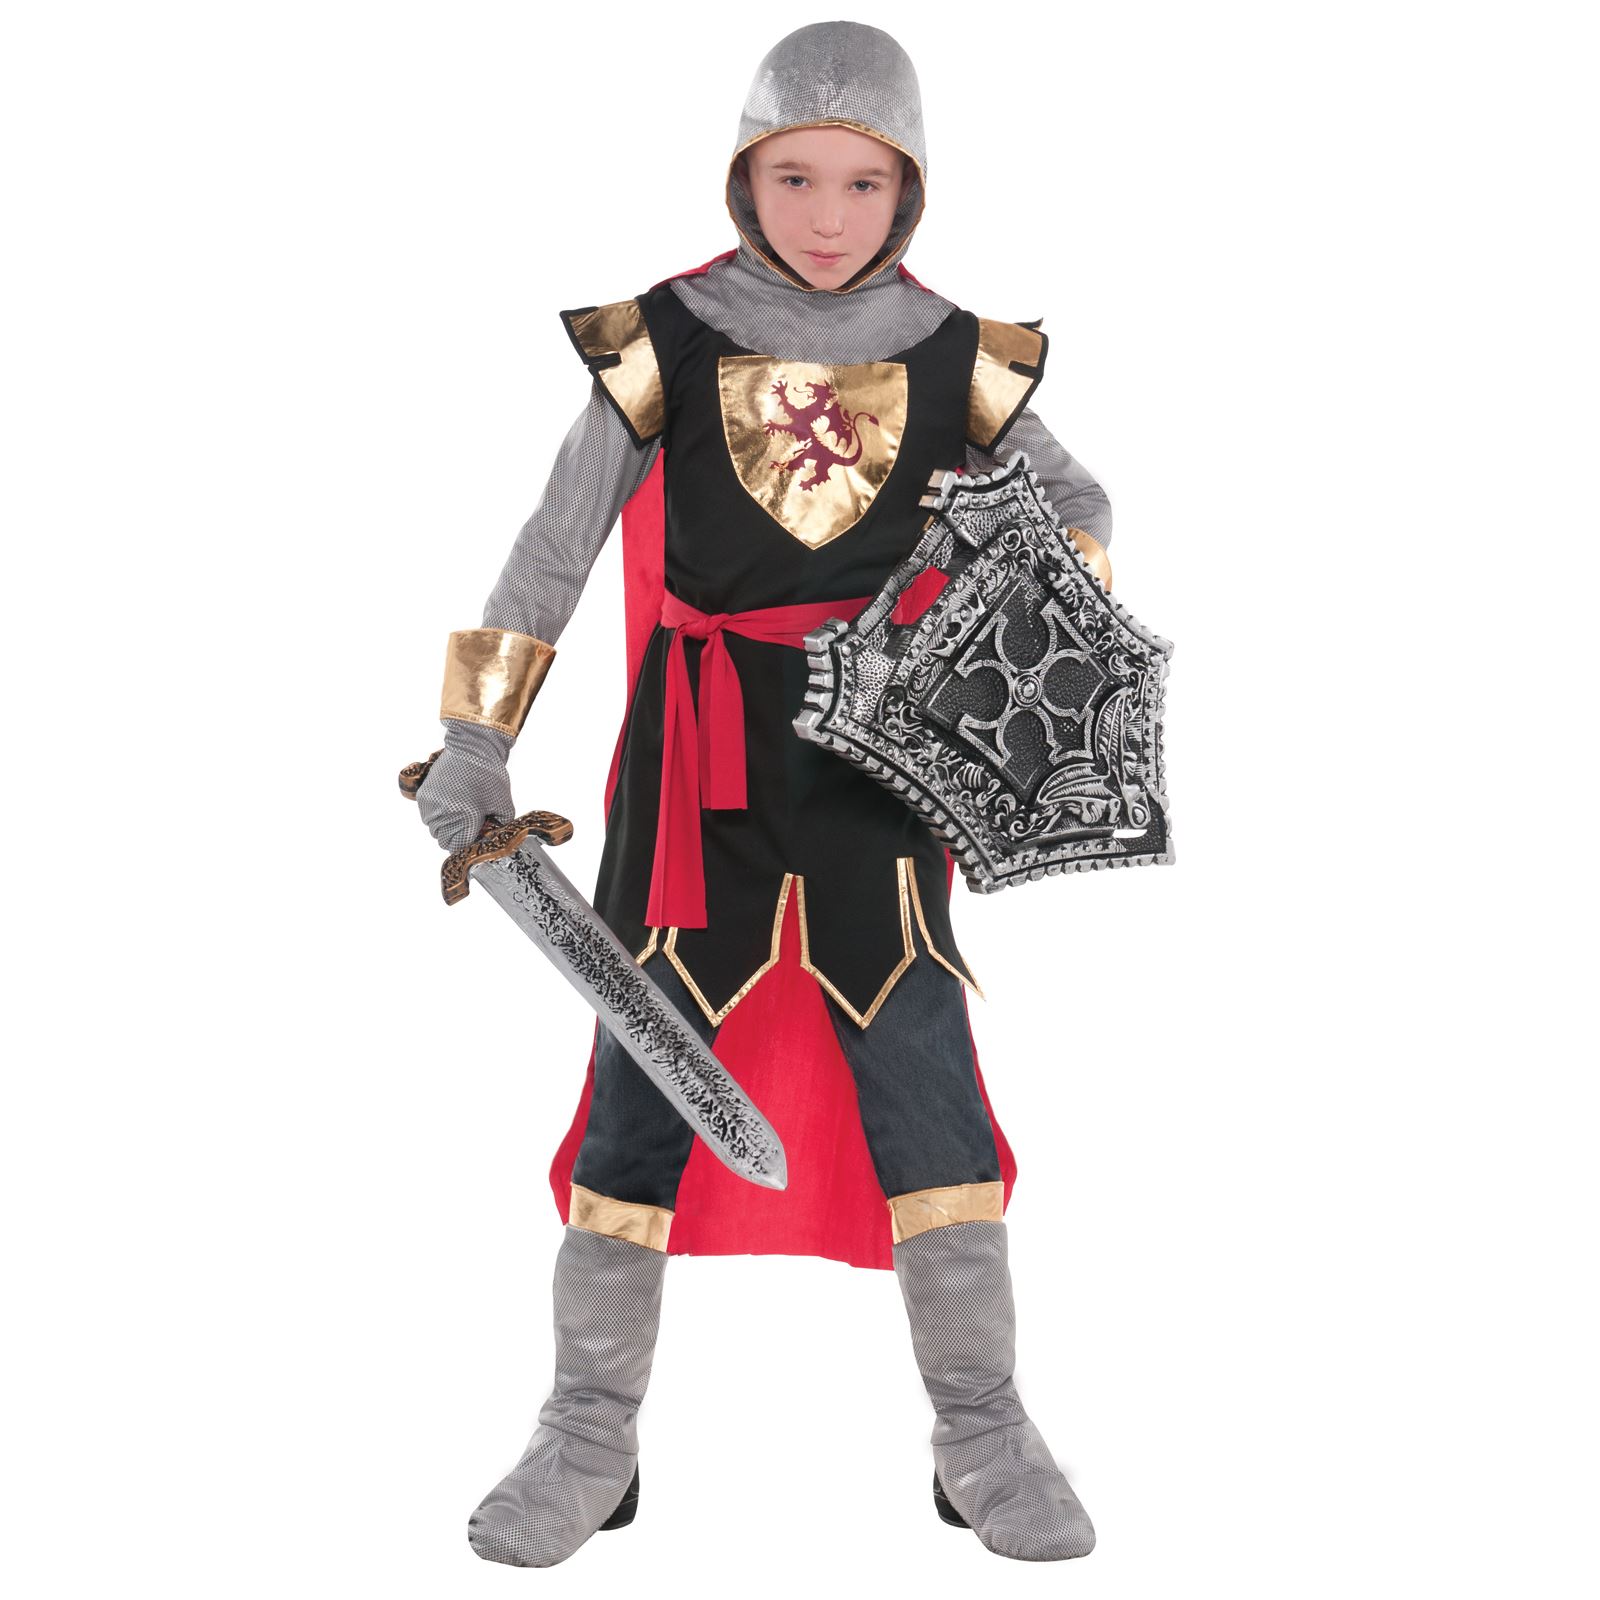 Collection of Knight Costume.